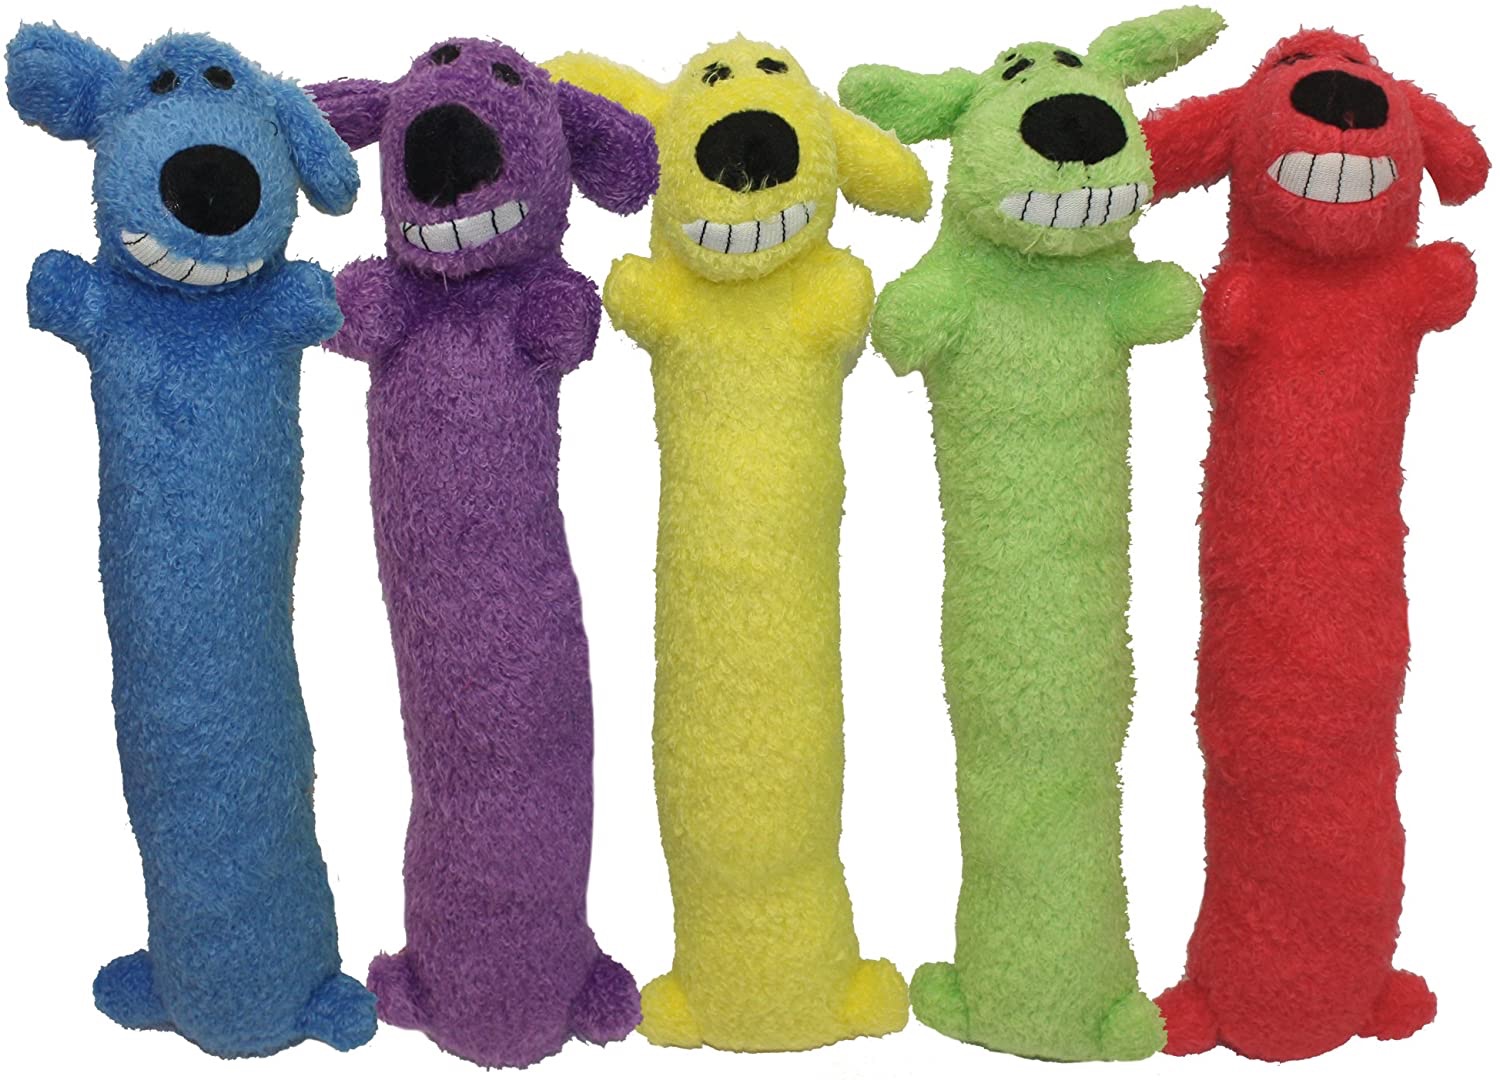 Pet Supplies : Multipet 12-inch Plush Dog Toy, Colors May Vary (Limited Edition) : Amazon.com 毛绒狗充气玩具